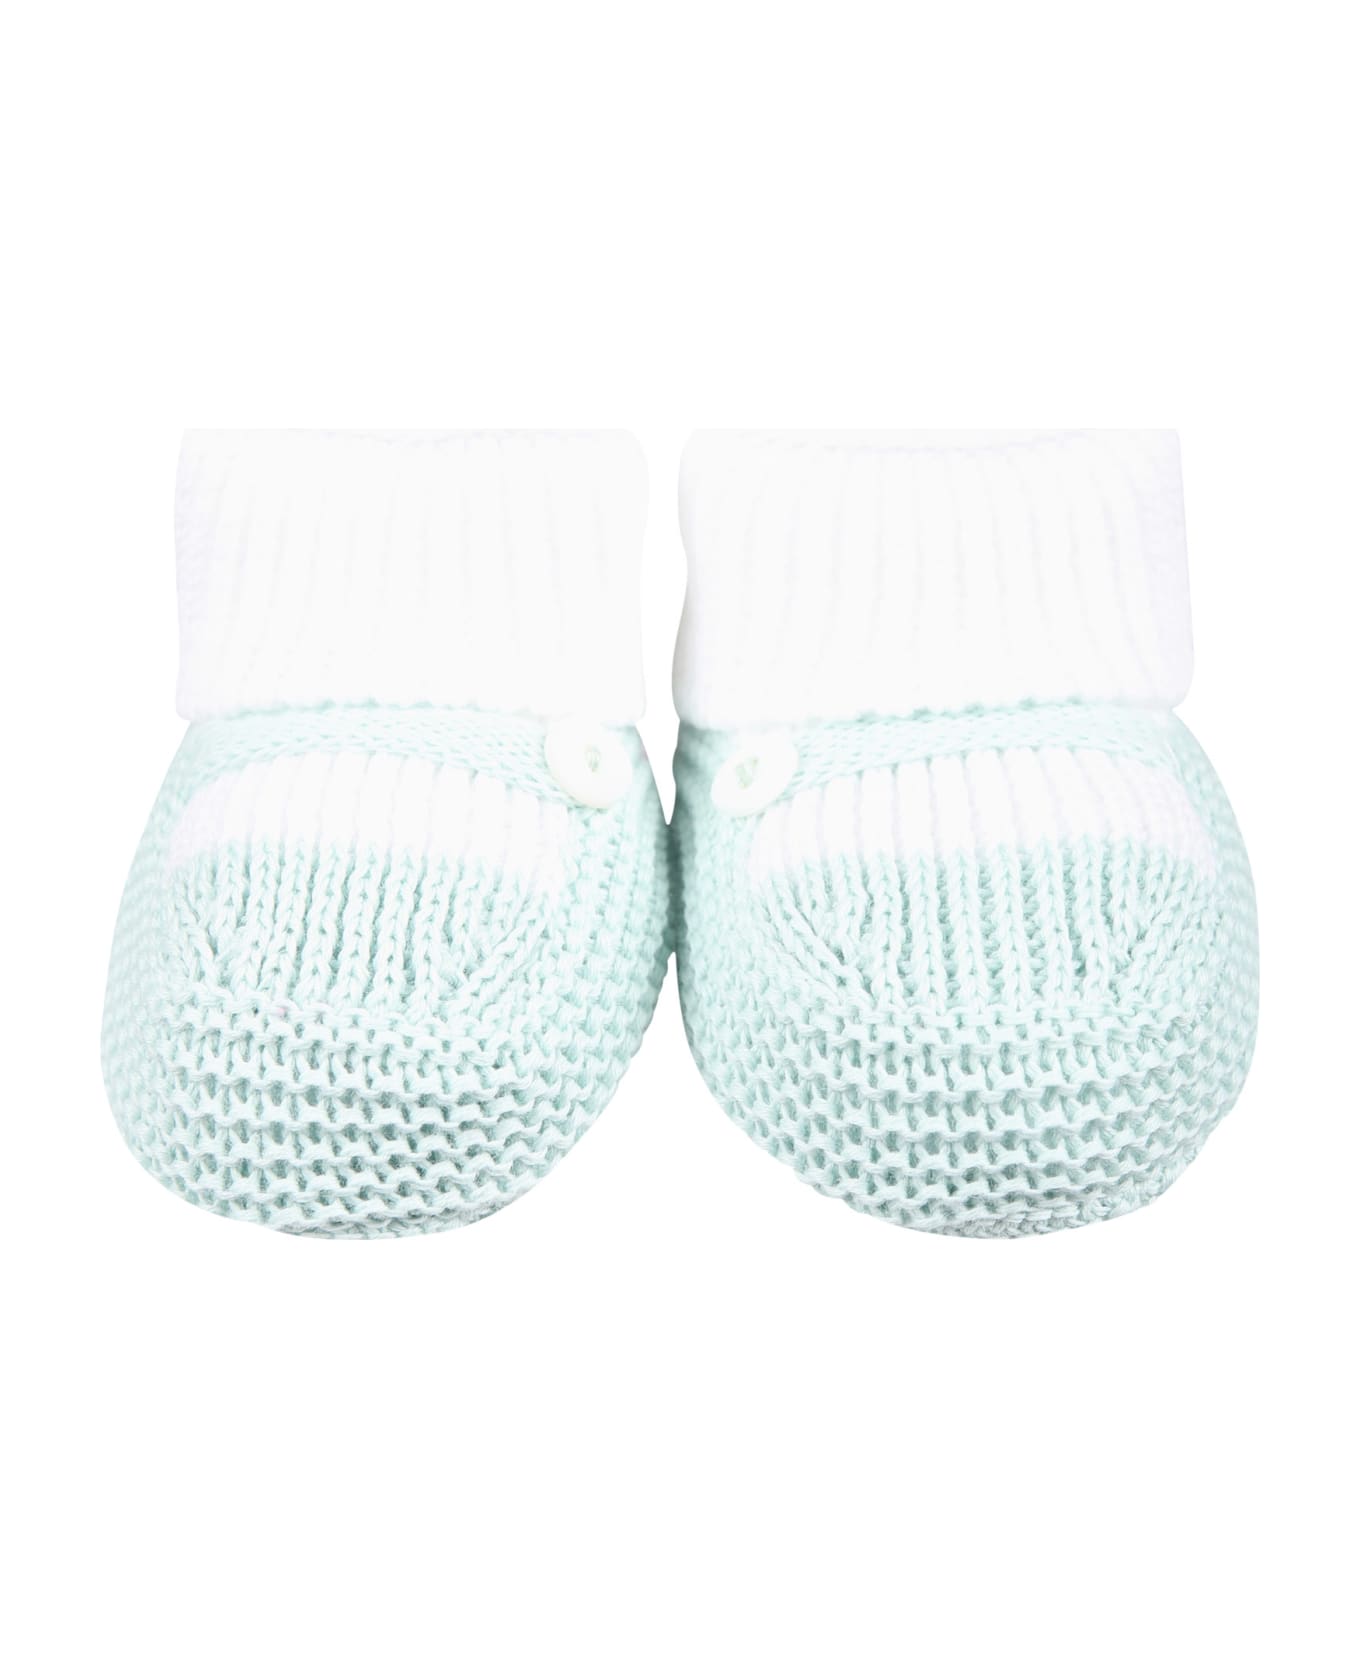 Little Bear Green Bootees For Baby Boy - Green